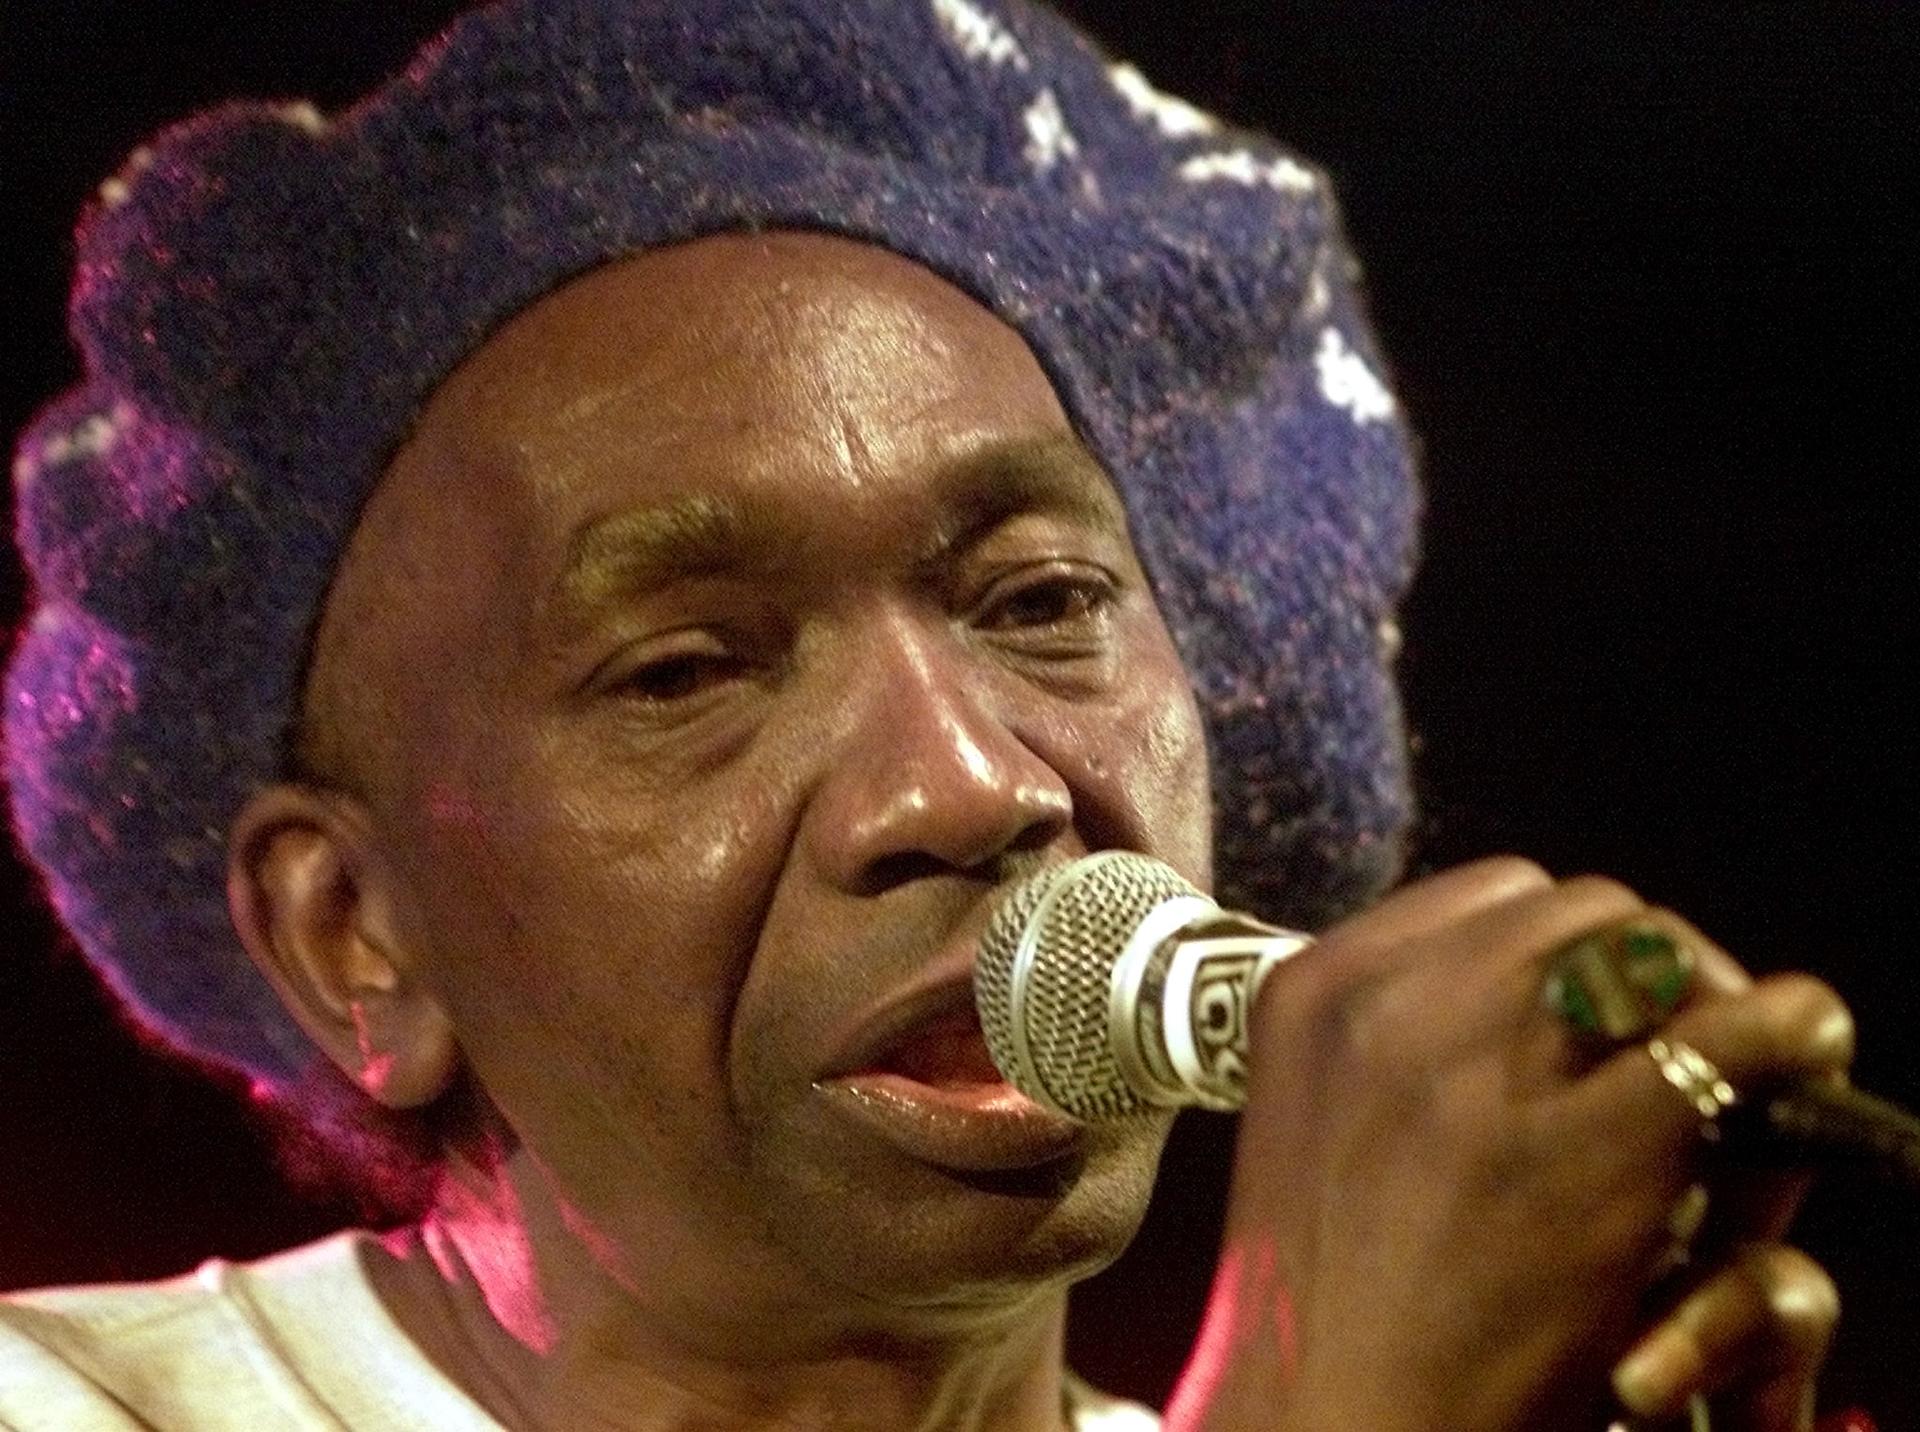 Thomas Mapfumo's music was banned by the country's state-owned media. 